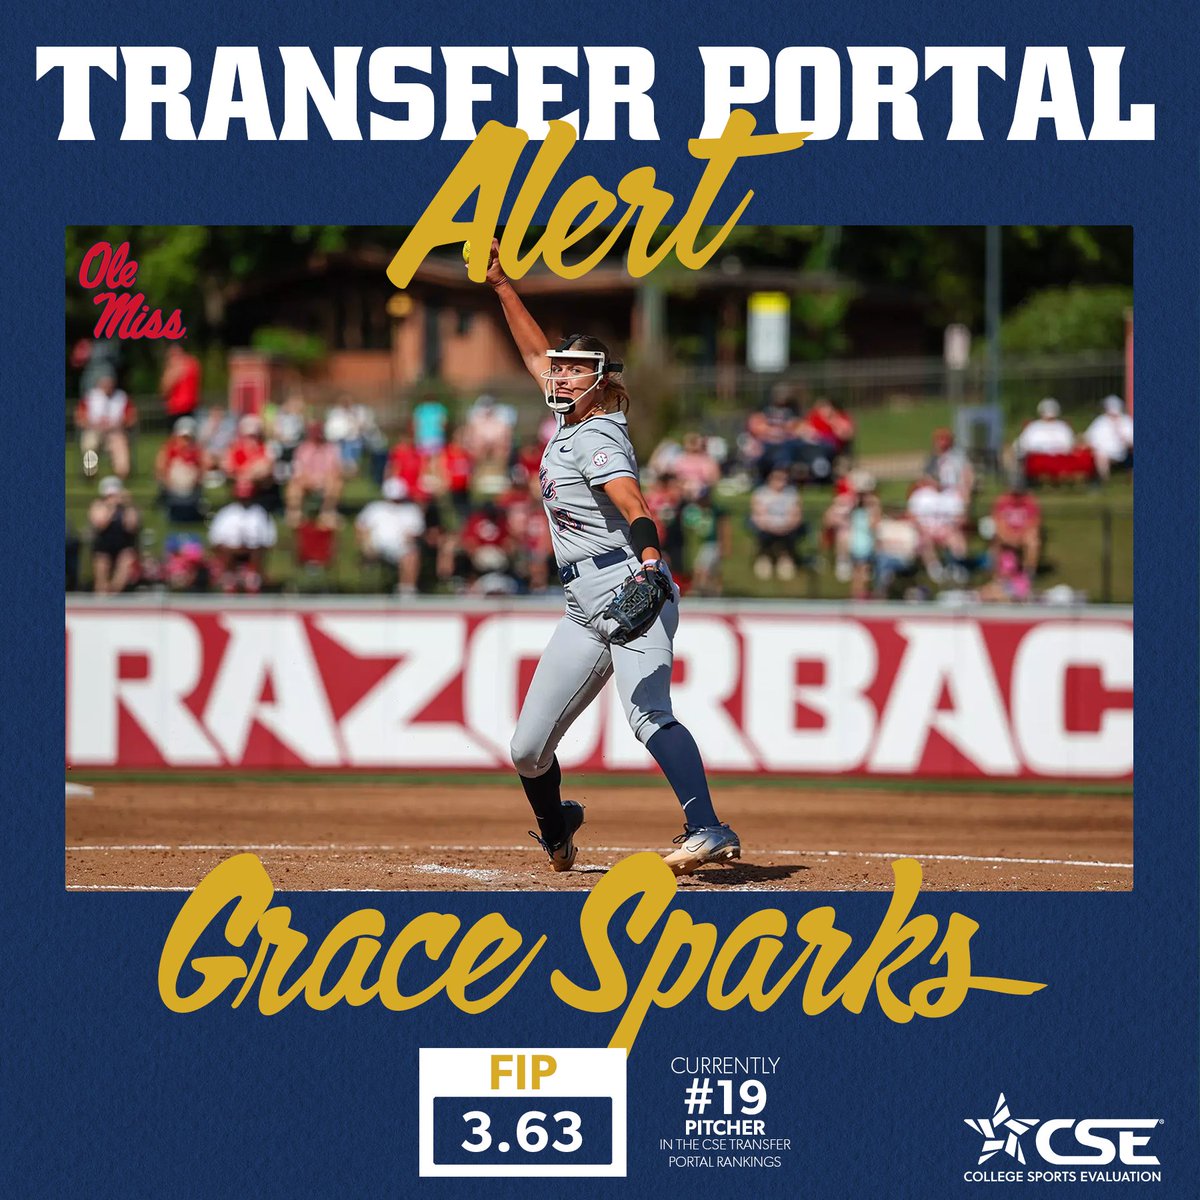 Former Ole Miss ace Grace Sparks is currently the #19 pitcher in the CSE Transfer Portal Rankings 2.14 ERA | 56 K's | 1.319 WHIP Check out more of Grace's stats and rankings ⬇️ app.cseval.com/transfer-porta… @graceelizsparks